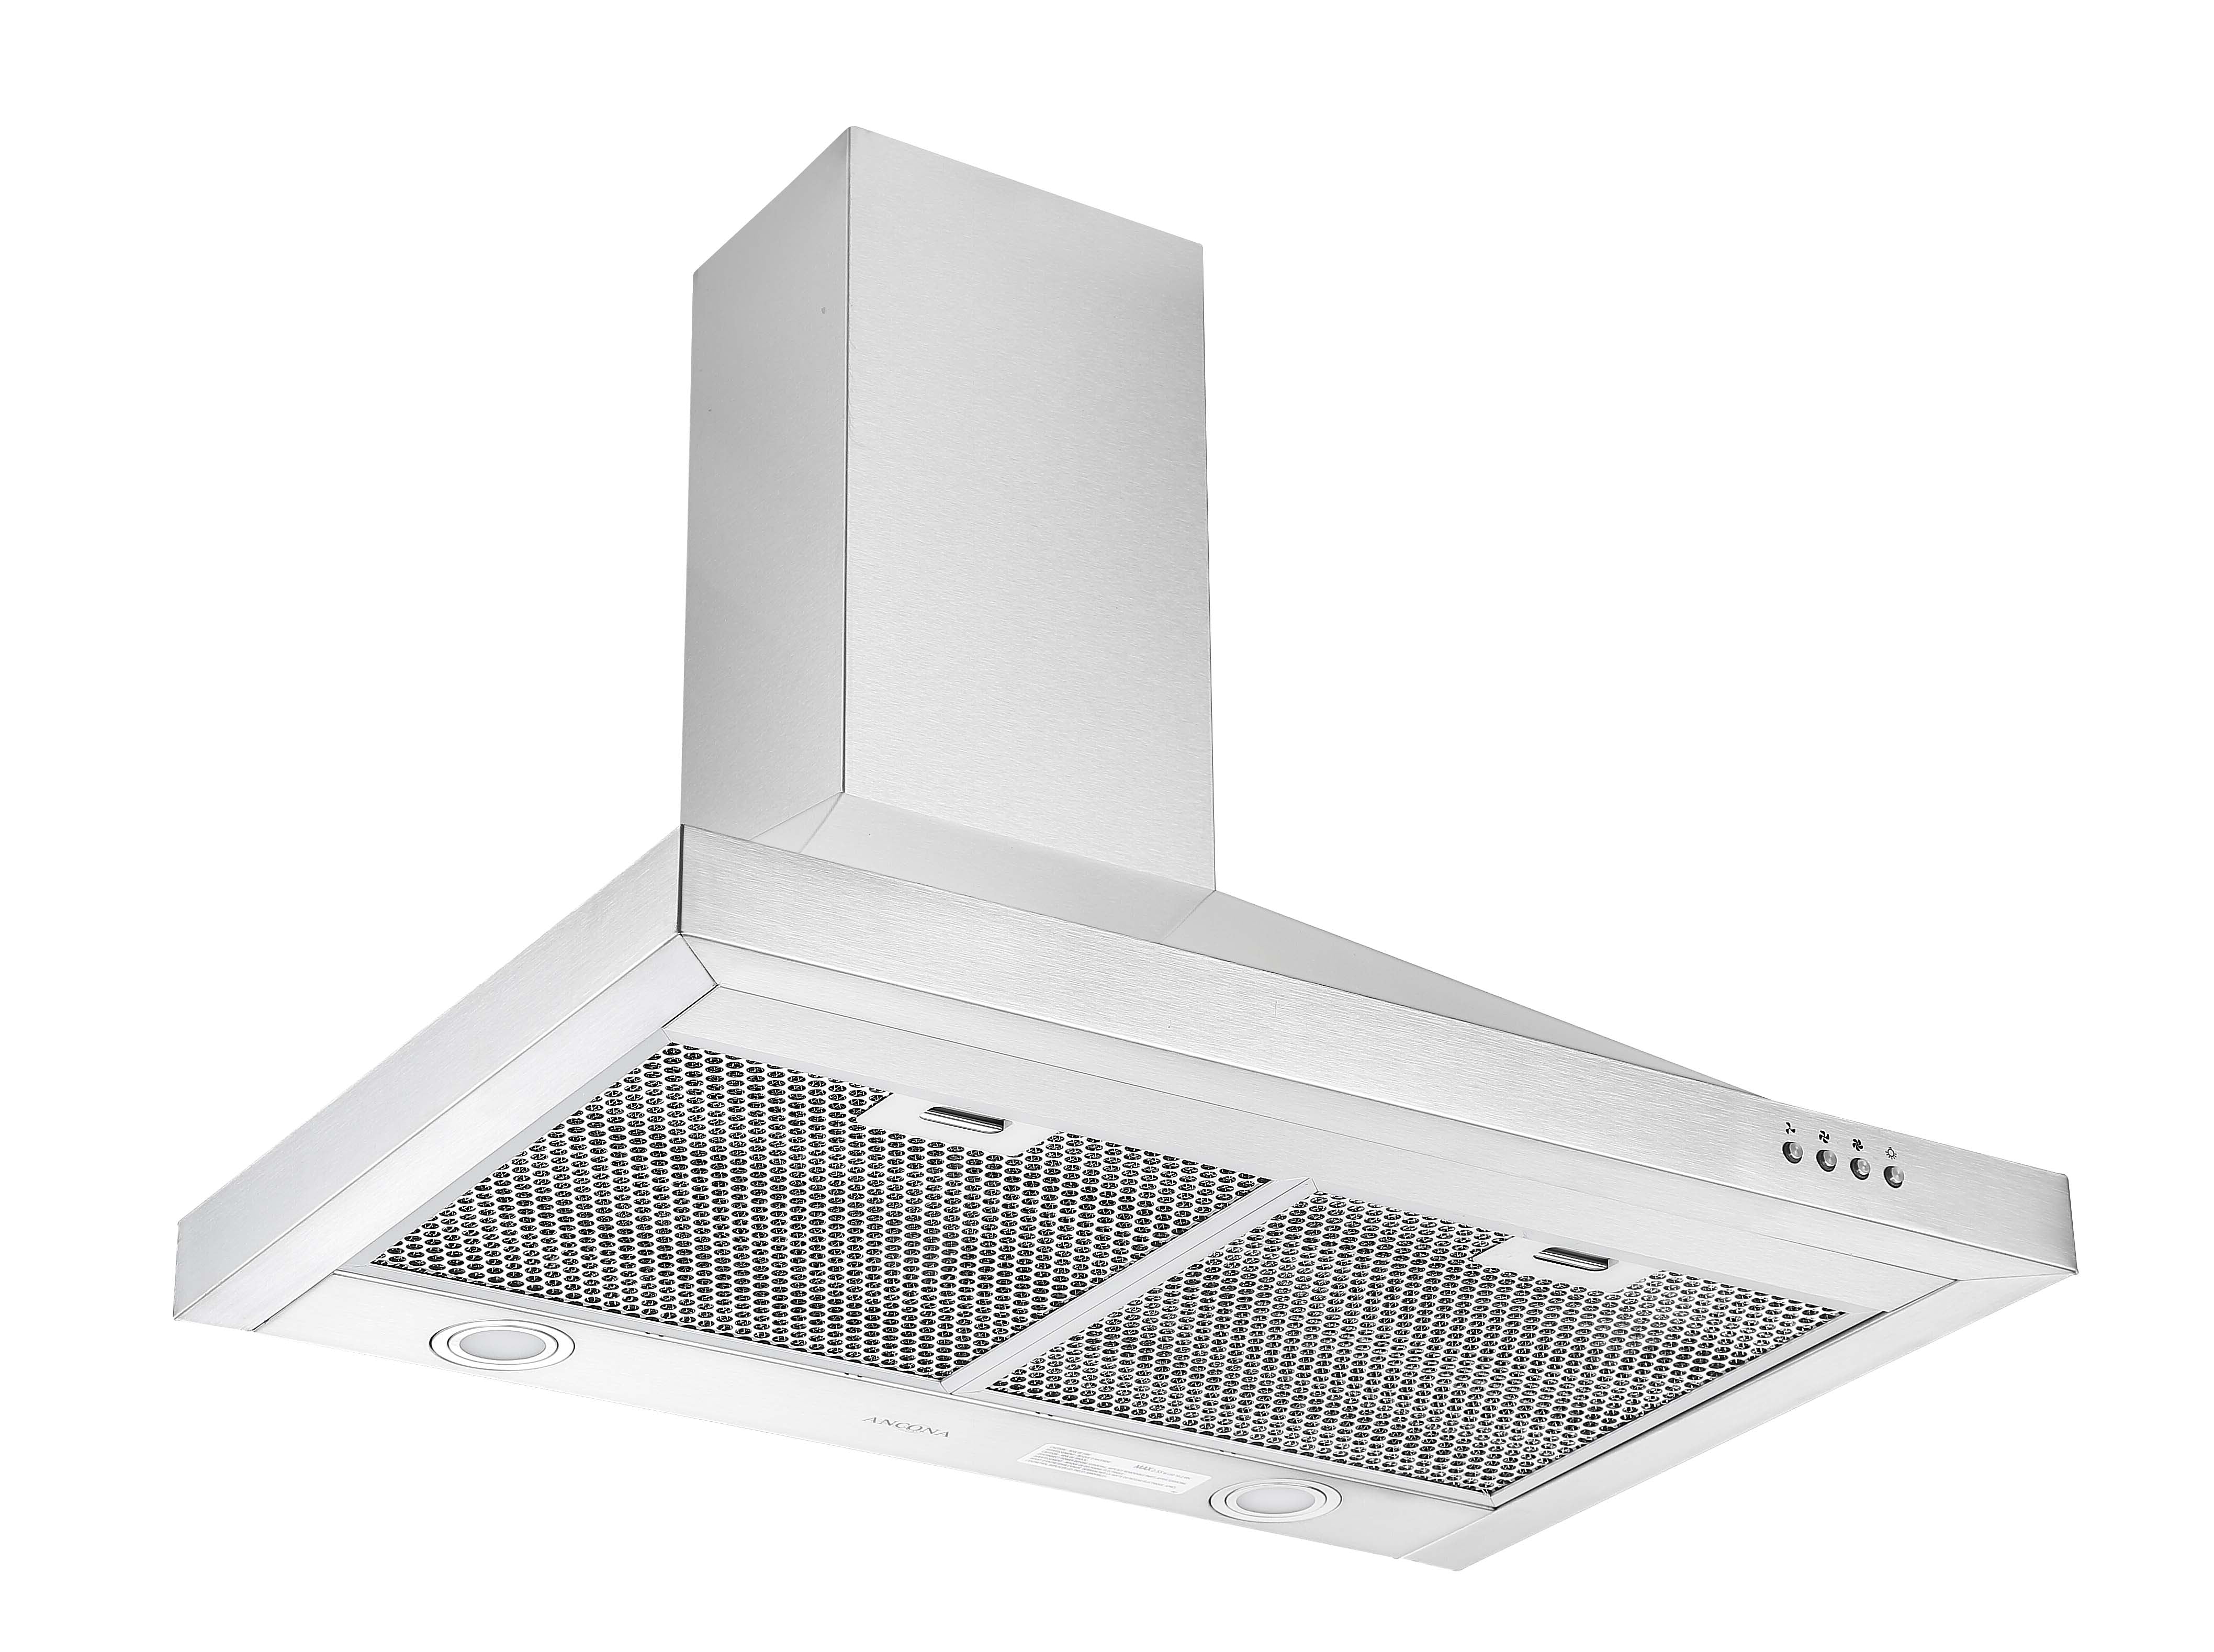 WRRV430 30 in. Rear-Vented Wall Mount Pyramid Range Hood in Stainless